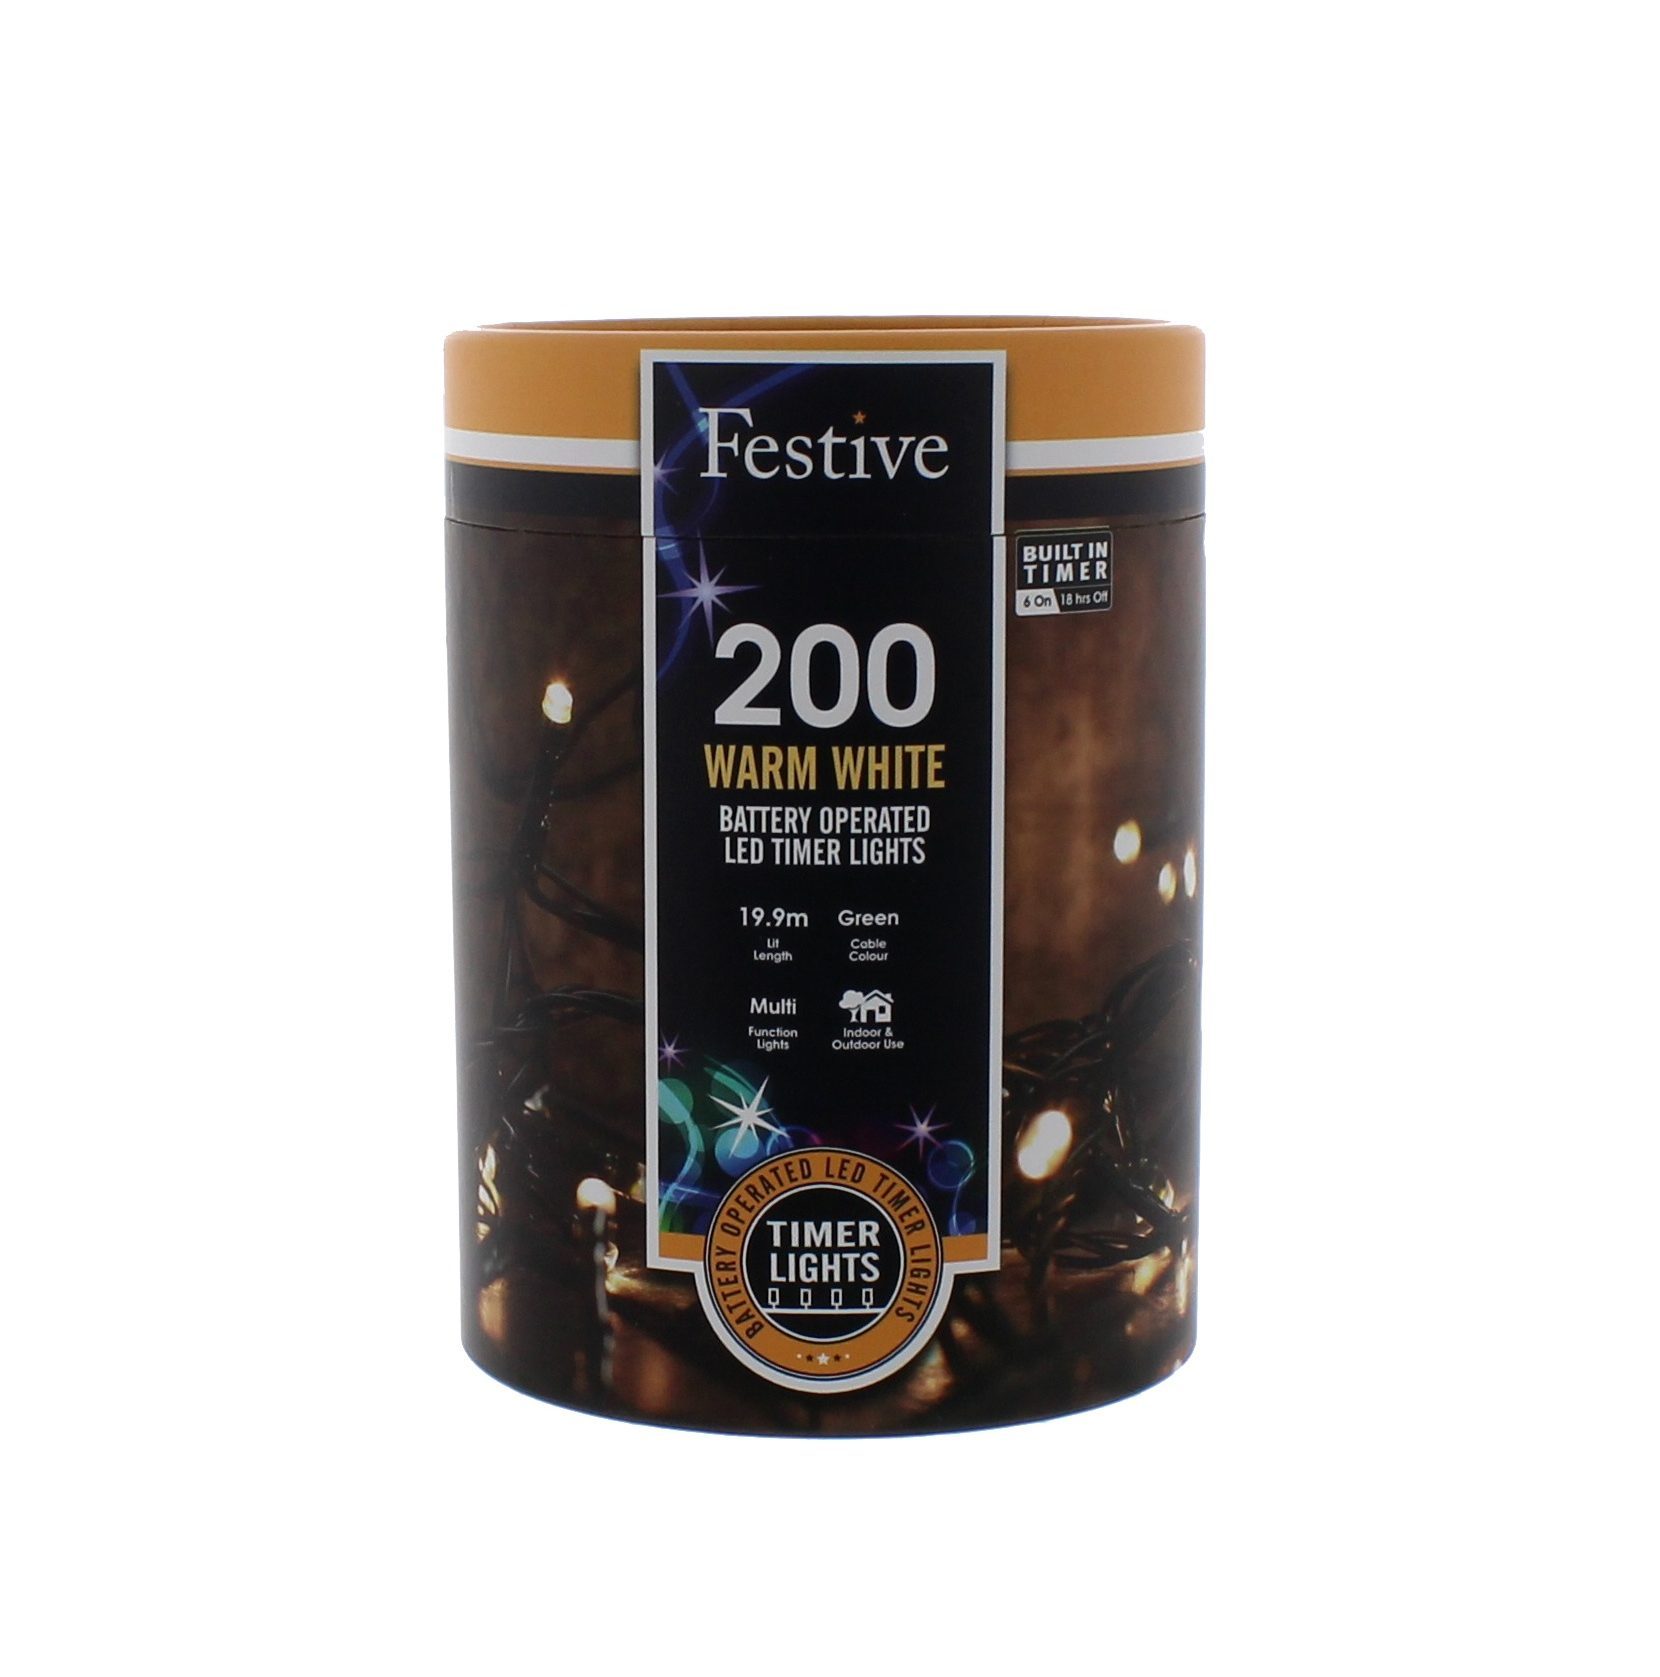 Festive 200 Battery Operated Timer String Lights